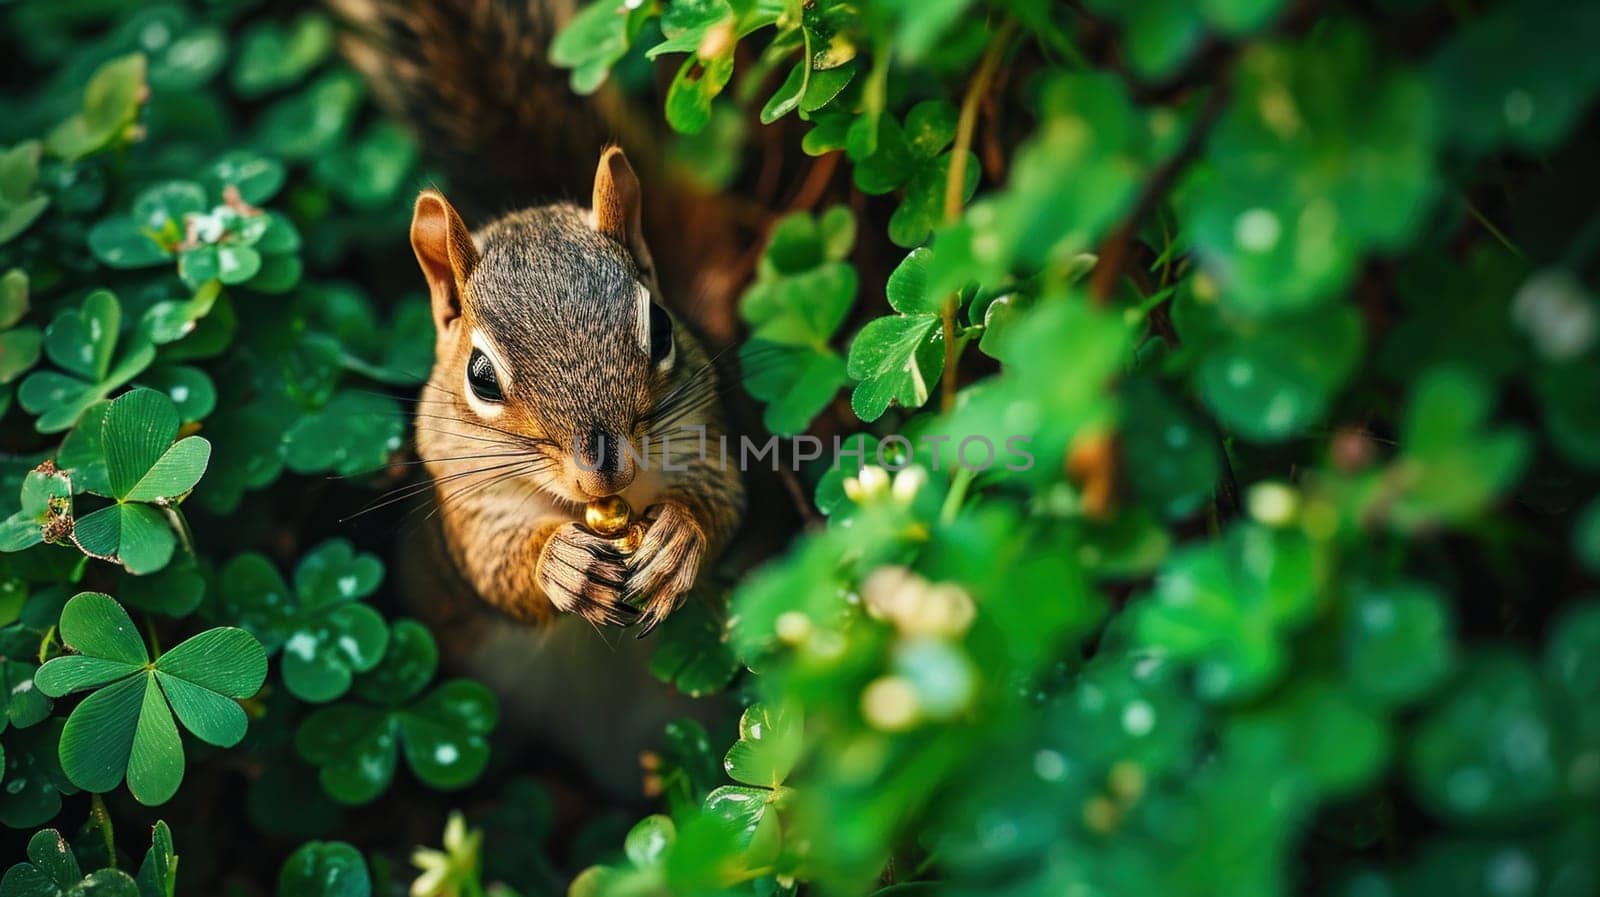 A squirrel peeking out from behind a bunch of green leaves